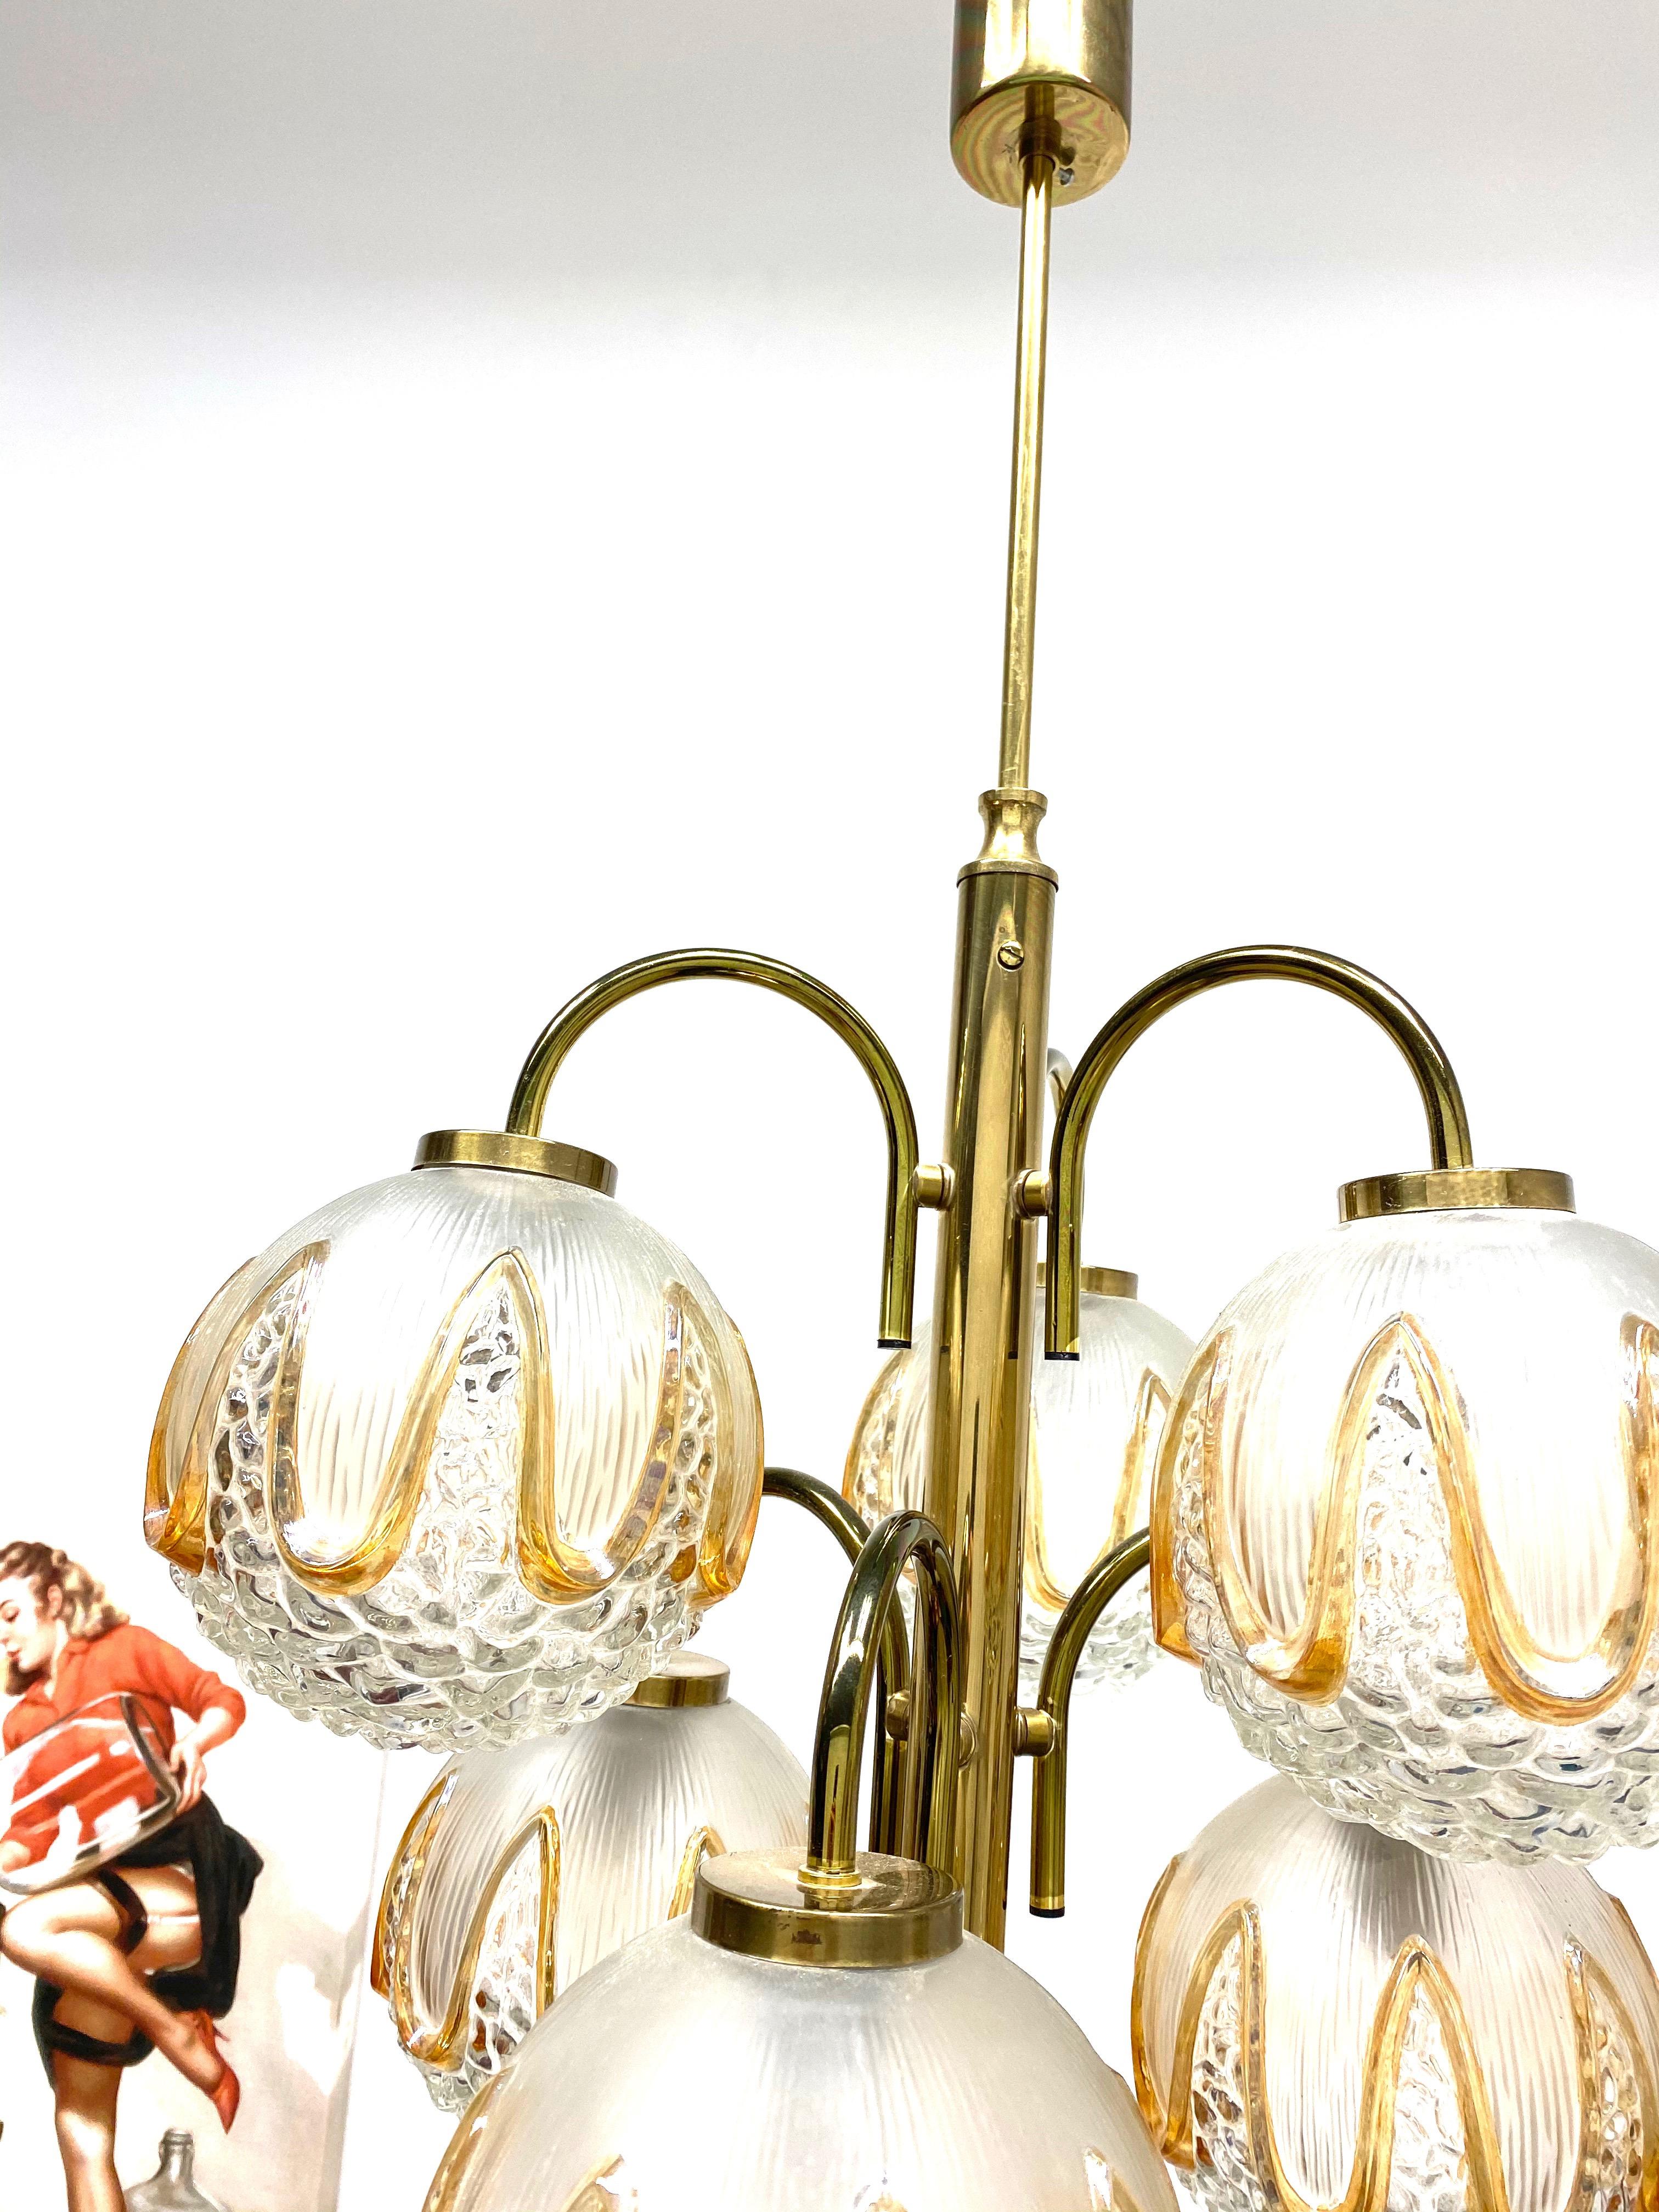 Metal 2-Tiered Richard Essig 6-Arm Biomorphic Glass Chandelier, 1970s, Germany For Sale